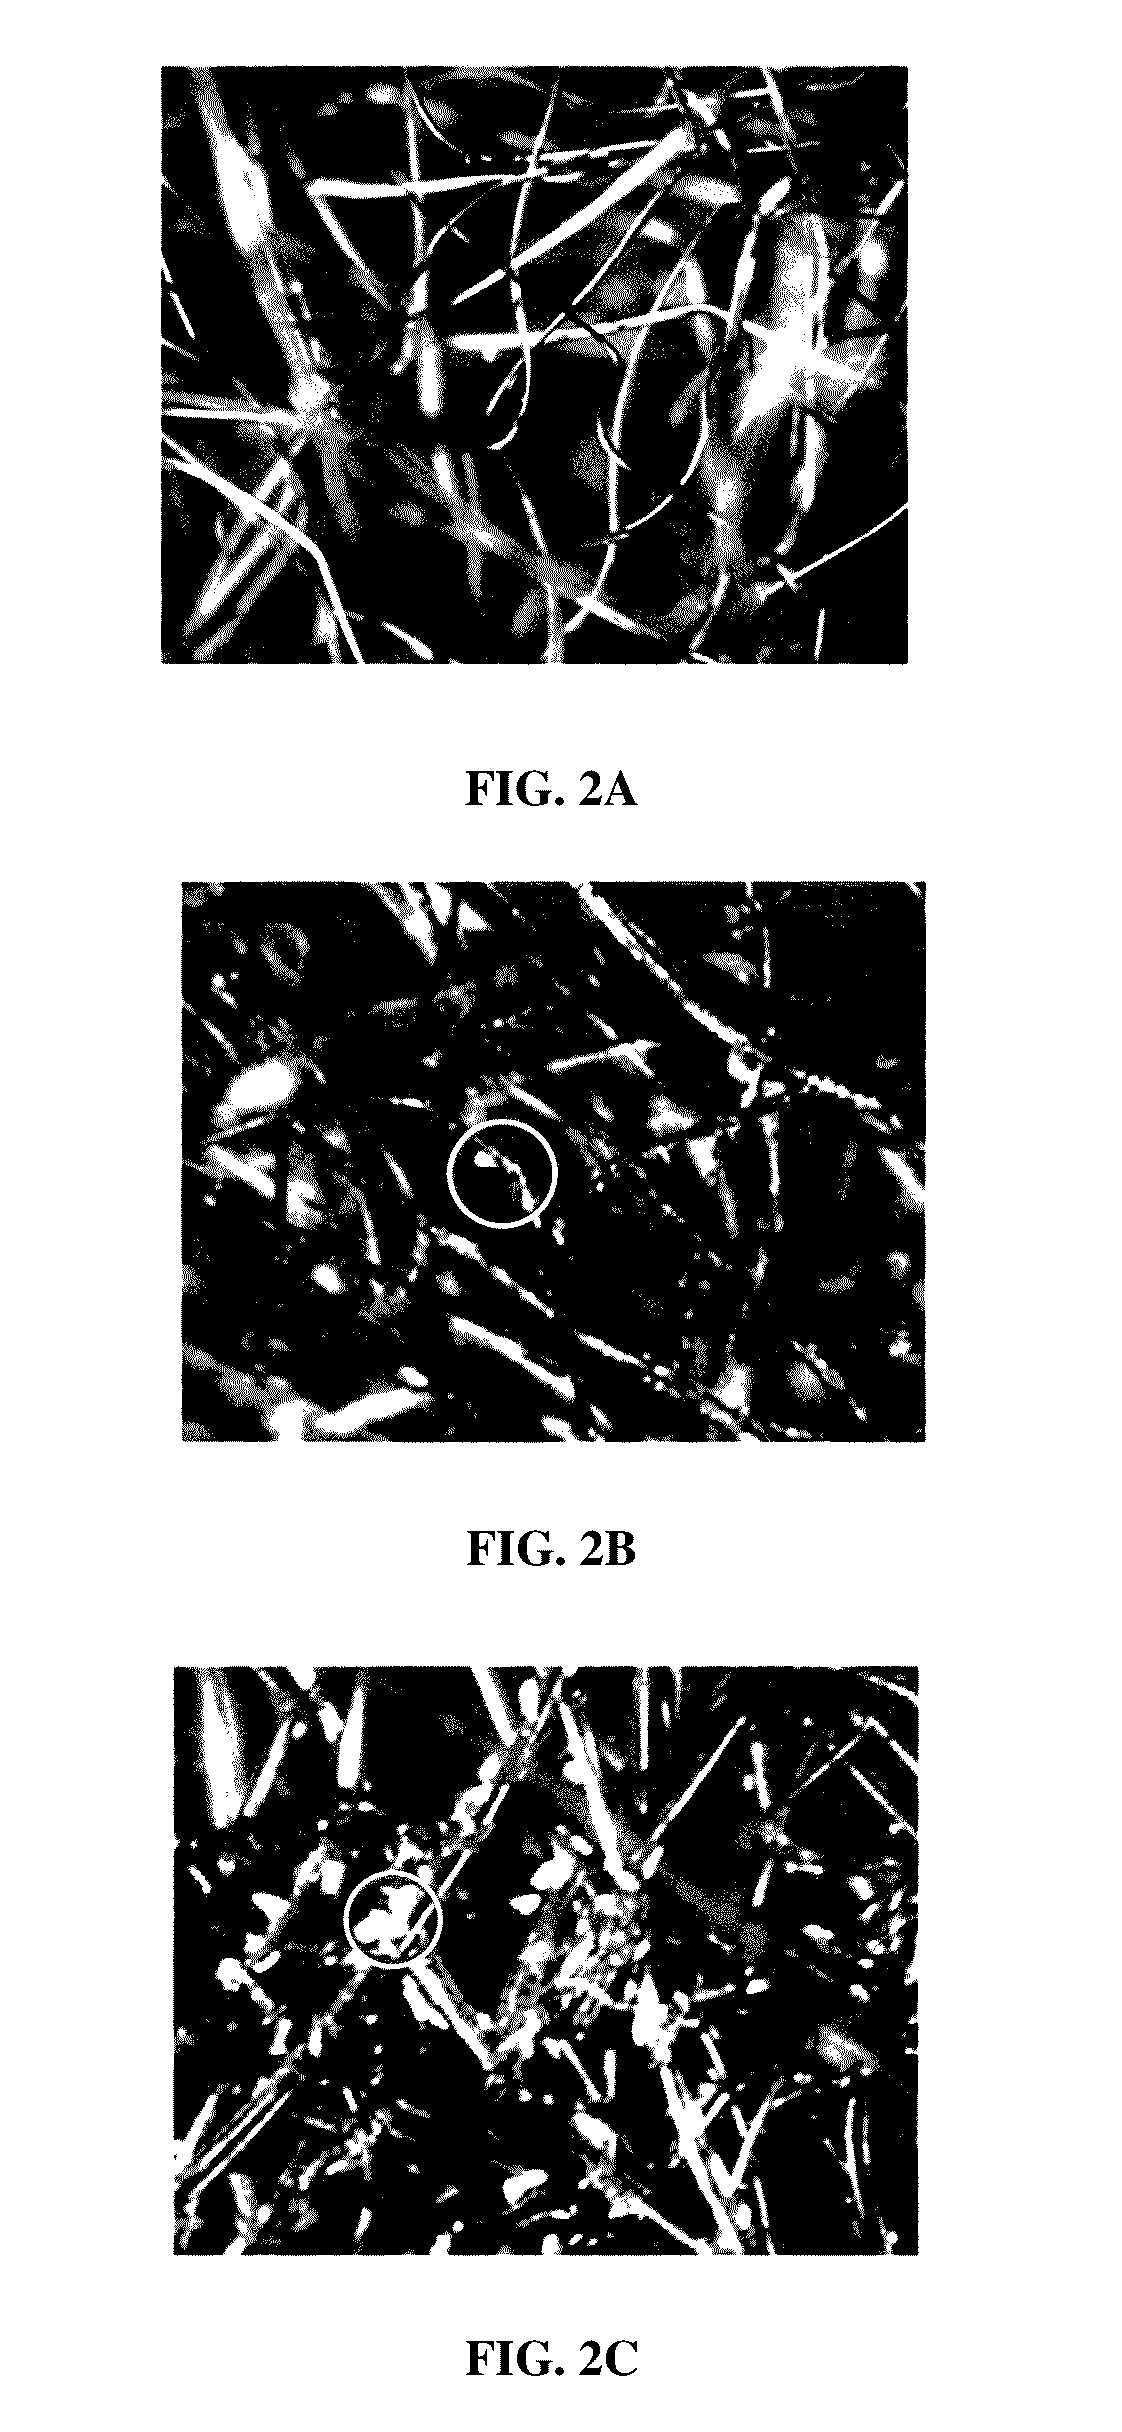 Sound absorbing and insulating material with superior moldability and appearance and method for manufacturing the same